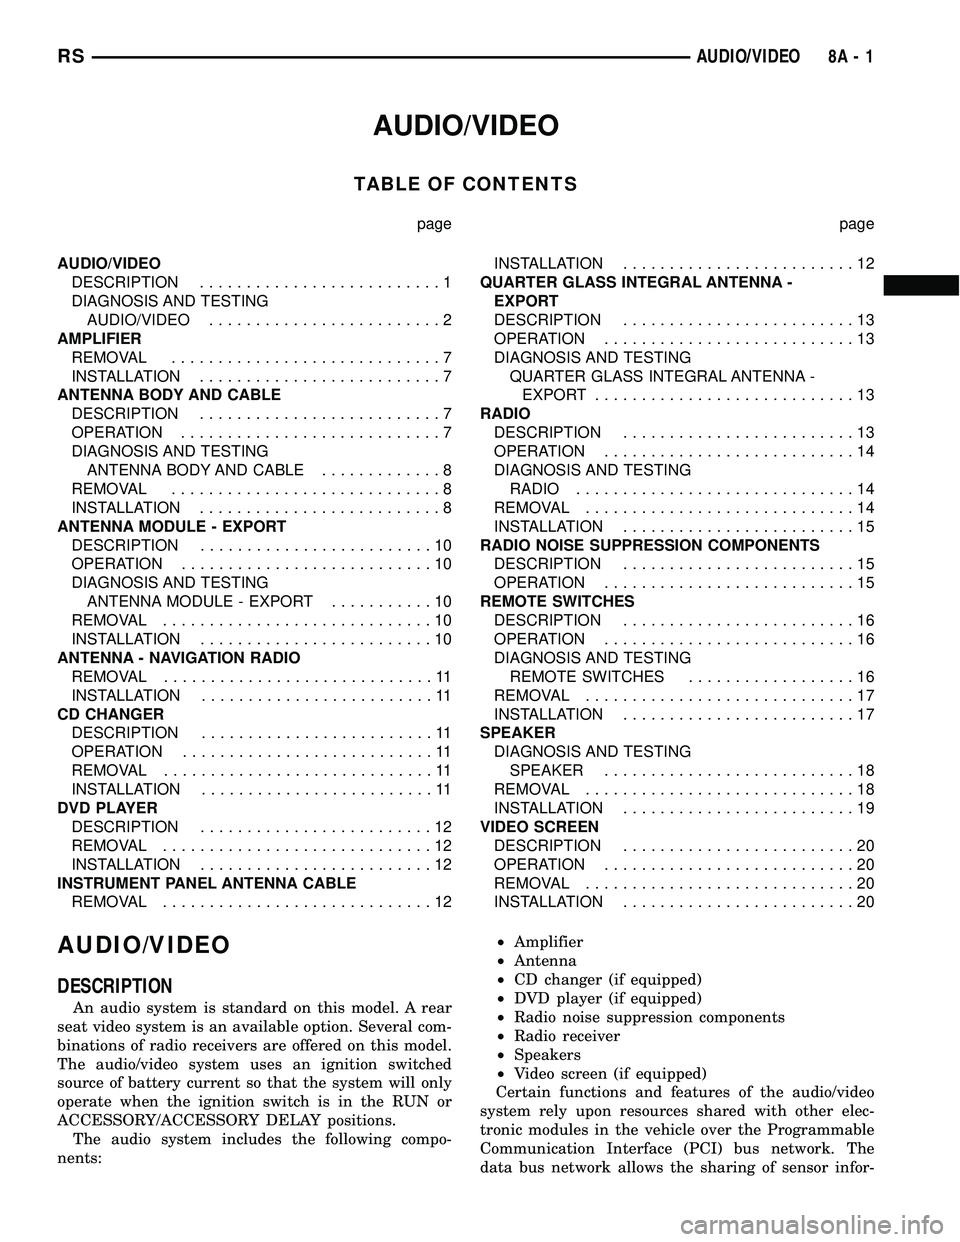 CHRYSLER CARAVAN 2005  Service Manual AUDIO/VIDEO
TABLE OF CONTENTS
page page
AUDIO/VIDEO
DESCRIPTION..........................1
DIAGNOSIS AND TESTING
AUDIO/VIDEO.........................2
AMPLIFIER
REMOVAL.............................7
I